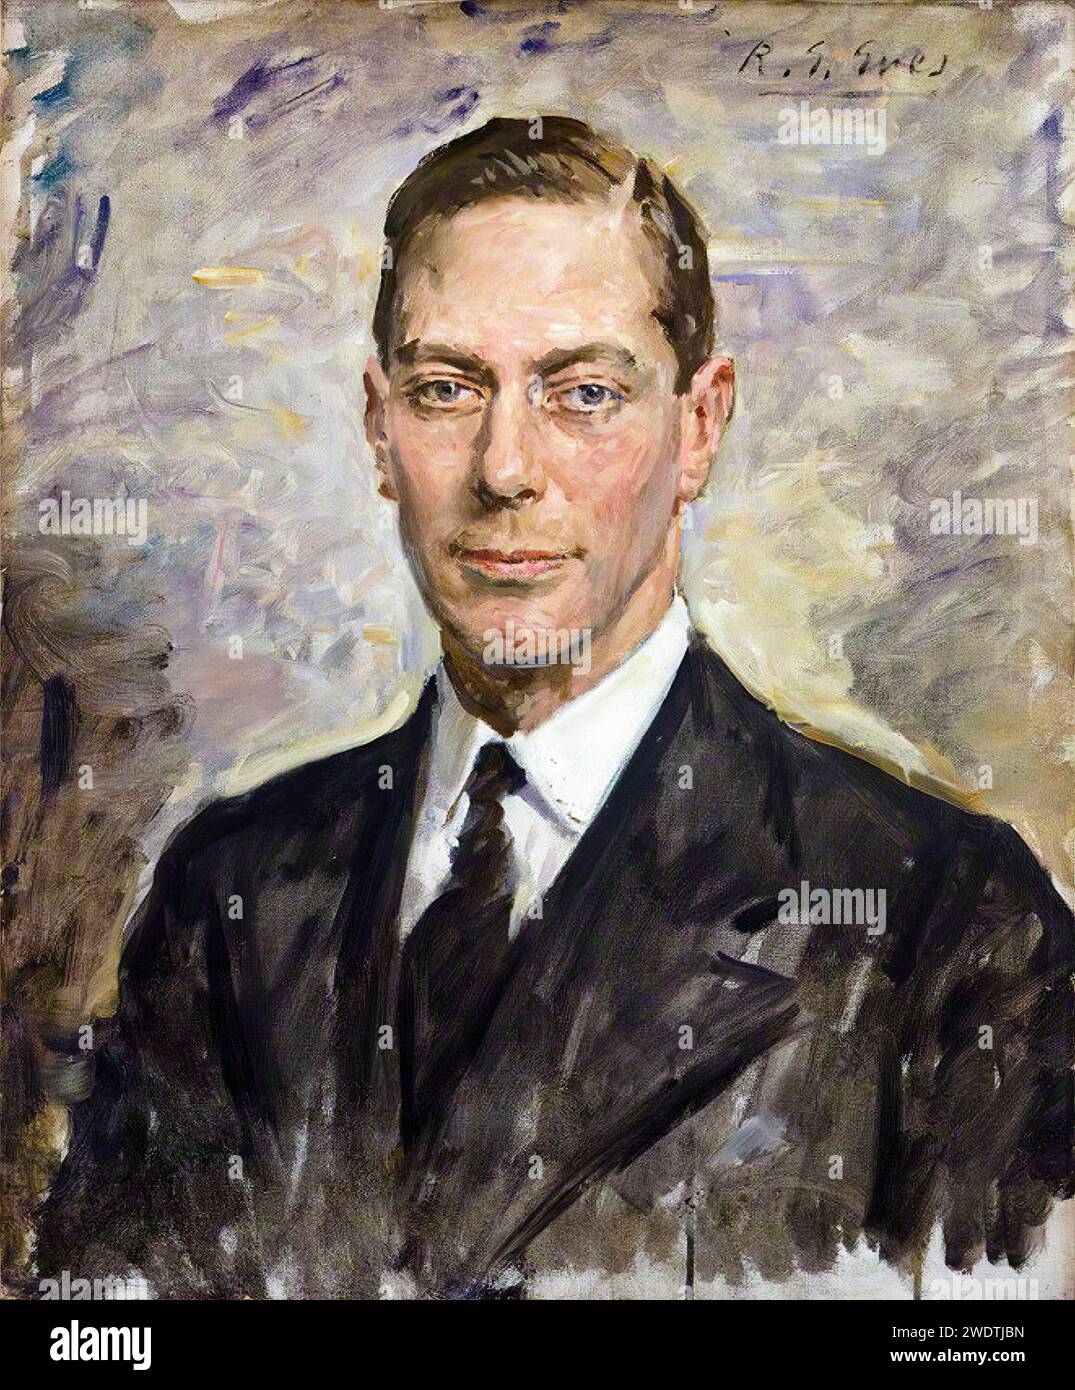 George VI (1895-1952), King of the United Kingdom (1936-1952), portrait painting in oil on canvas by Reginald Grenville Eves, 1924 Stock Photo